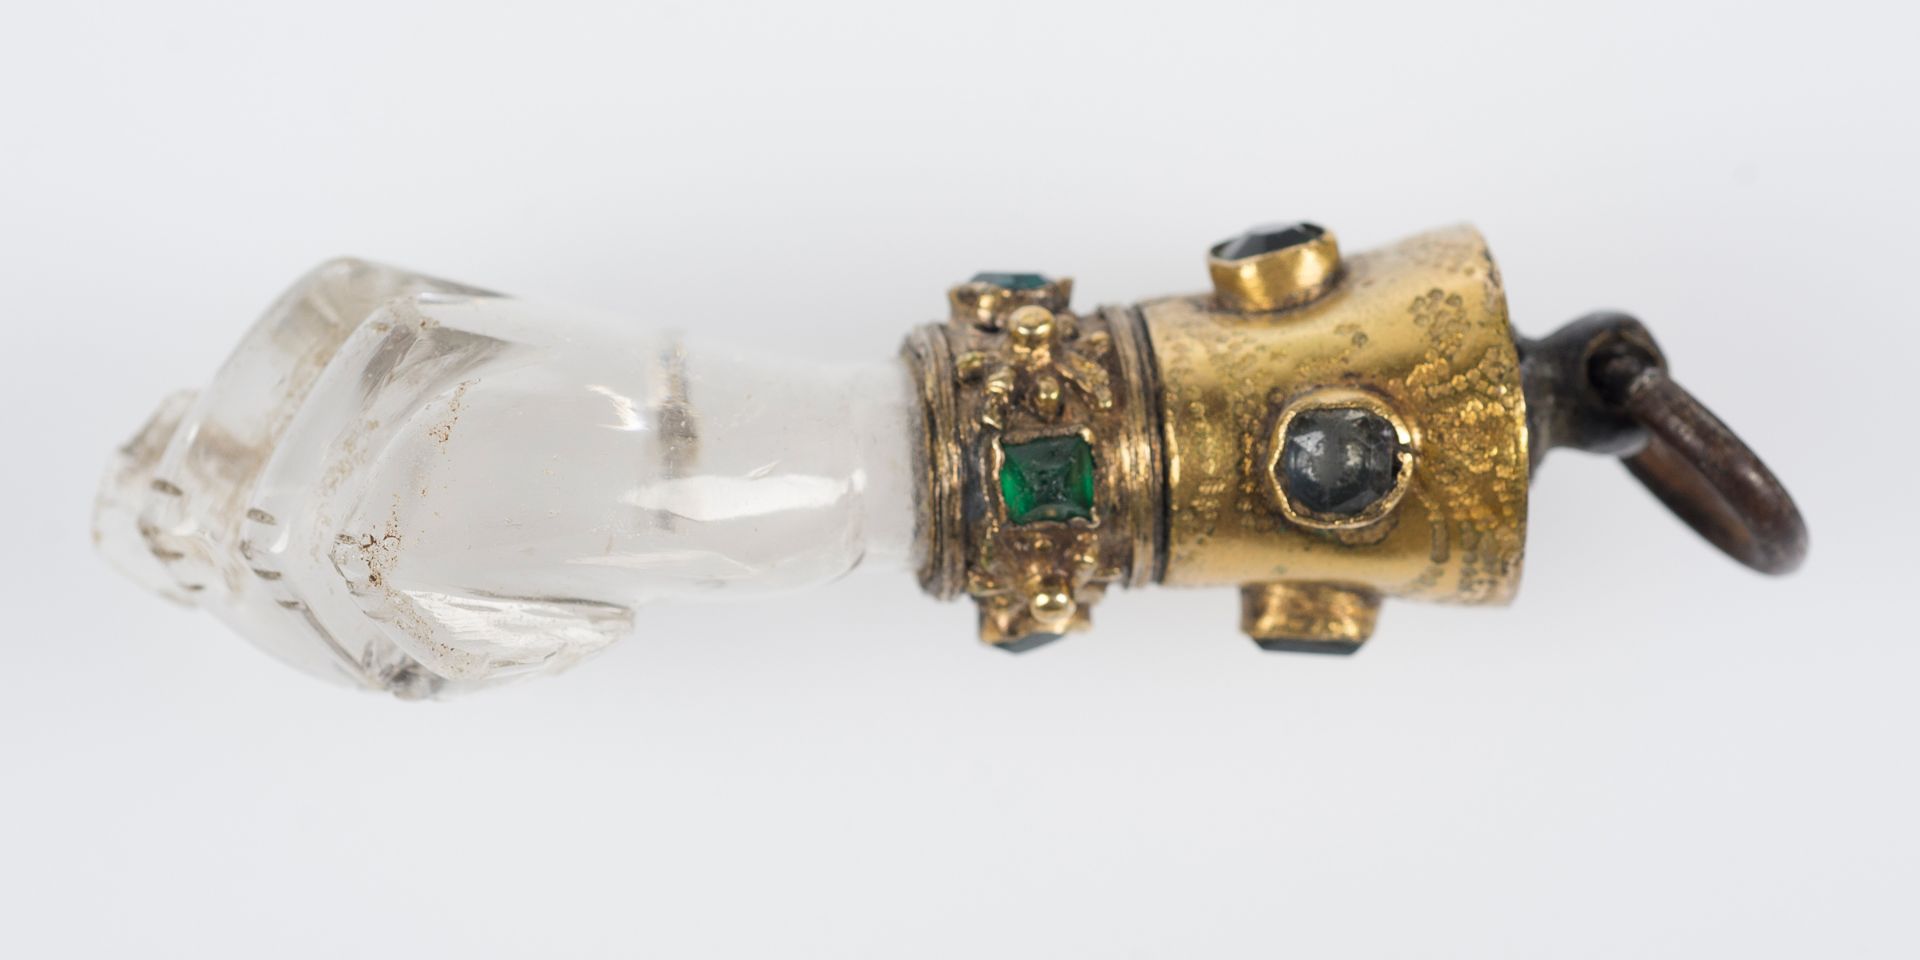 Rock crystal and gilded copper figa with precious stone cabochons. Gothic. 15th century. - Bild 5 aus 7